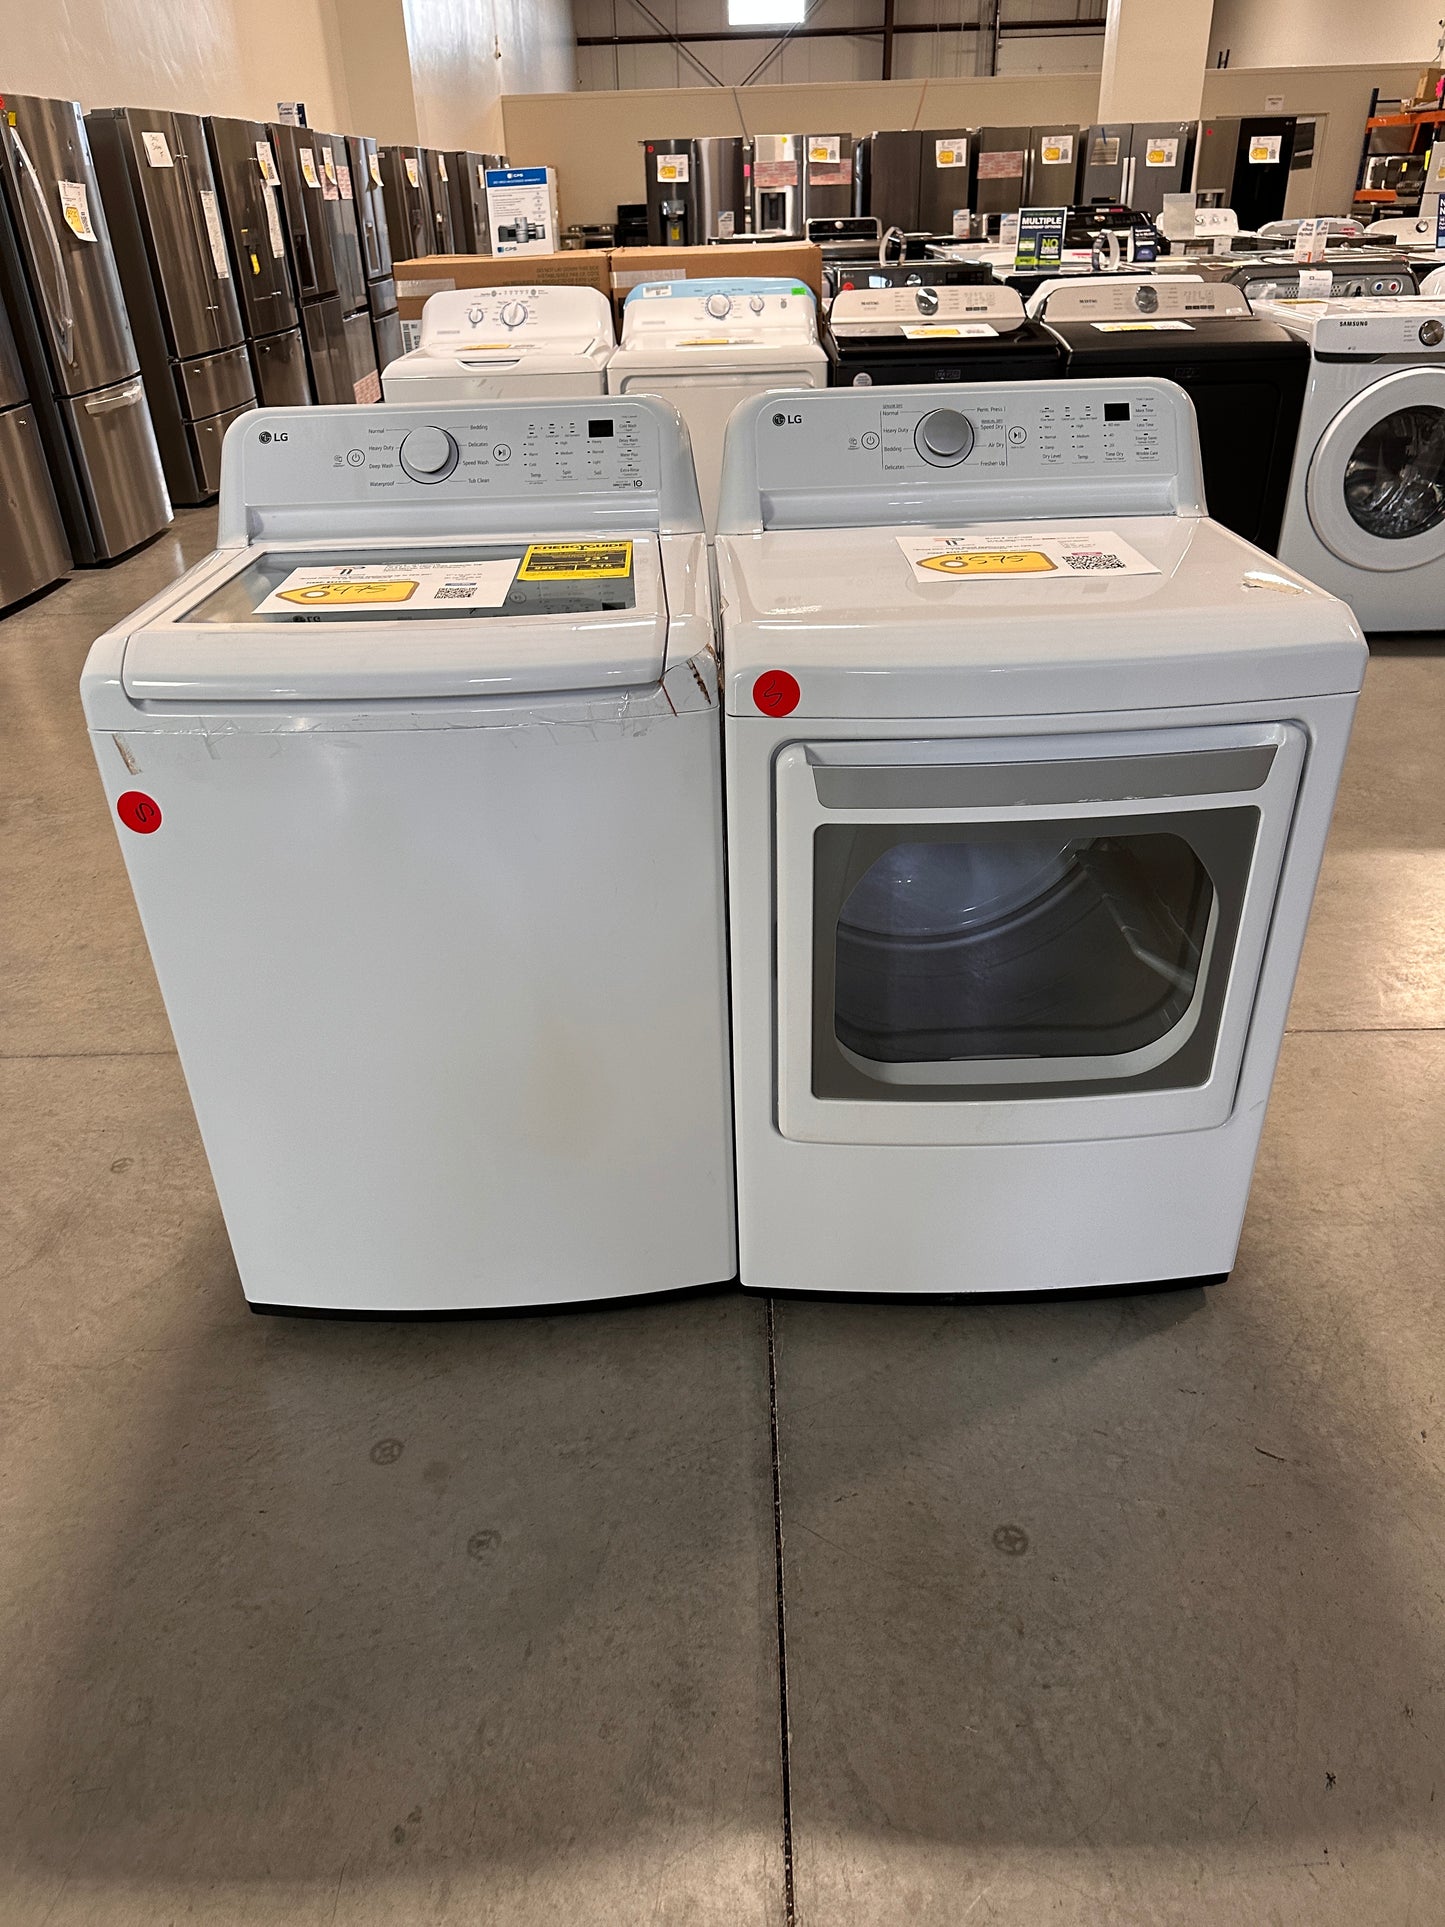 GREAT NEW TOP LOAD WASHER ELECTRIC DRYER LG LAUNDRY SET - WAS13289 DRY12596